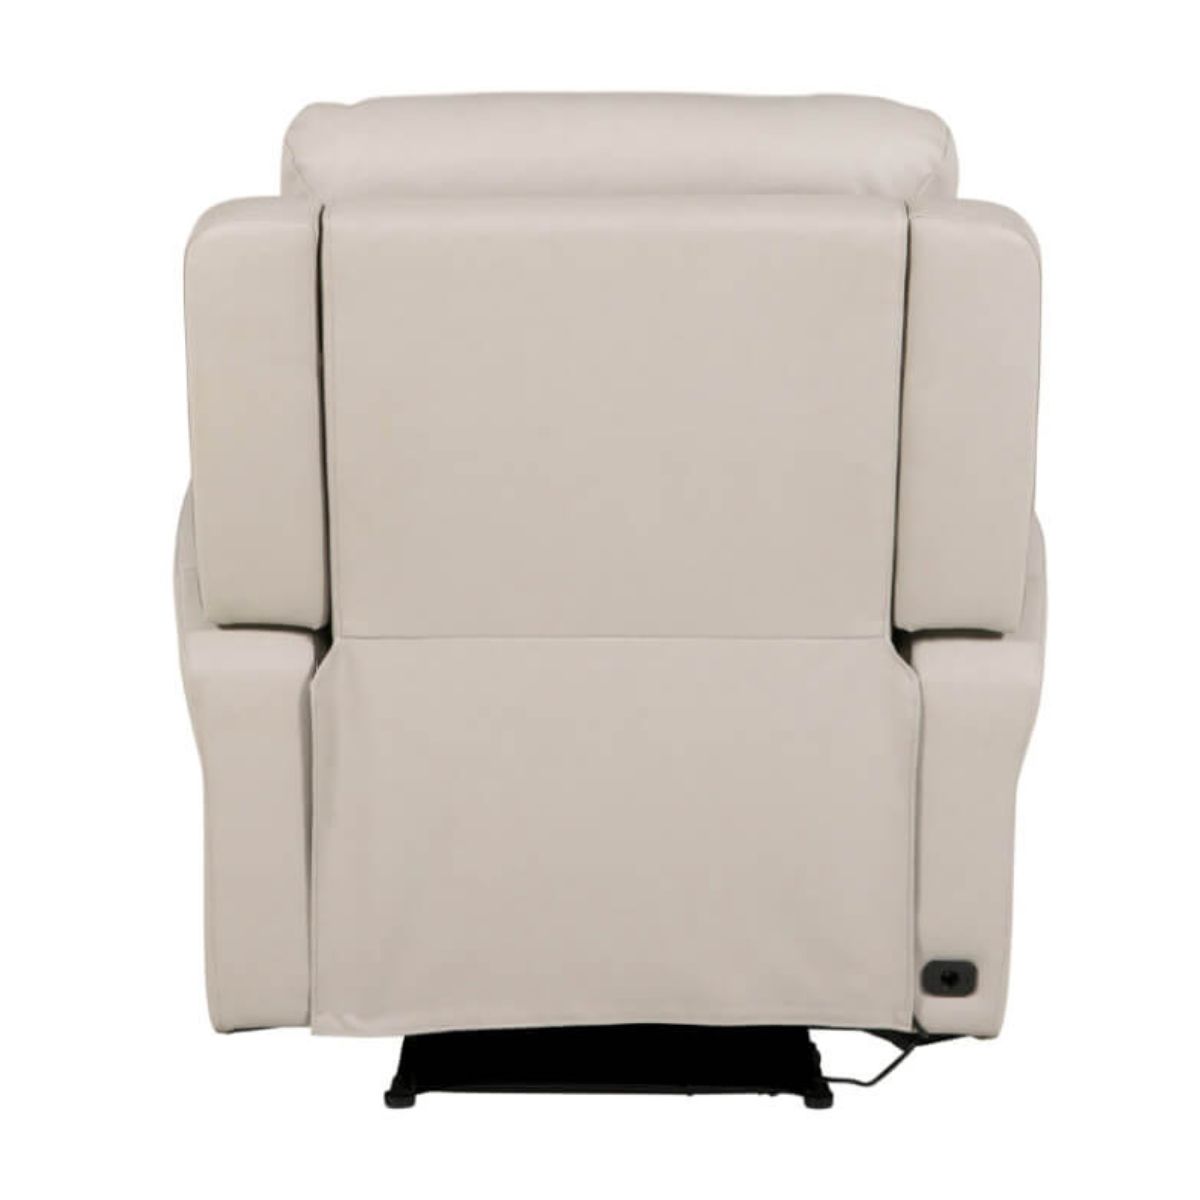 Rosslare Leather Electric Recliner Armchair Beige - 4